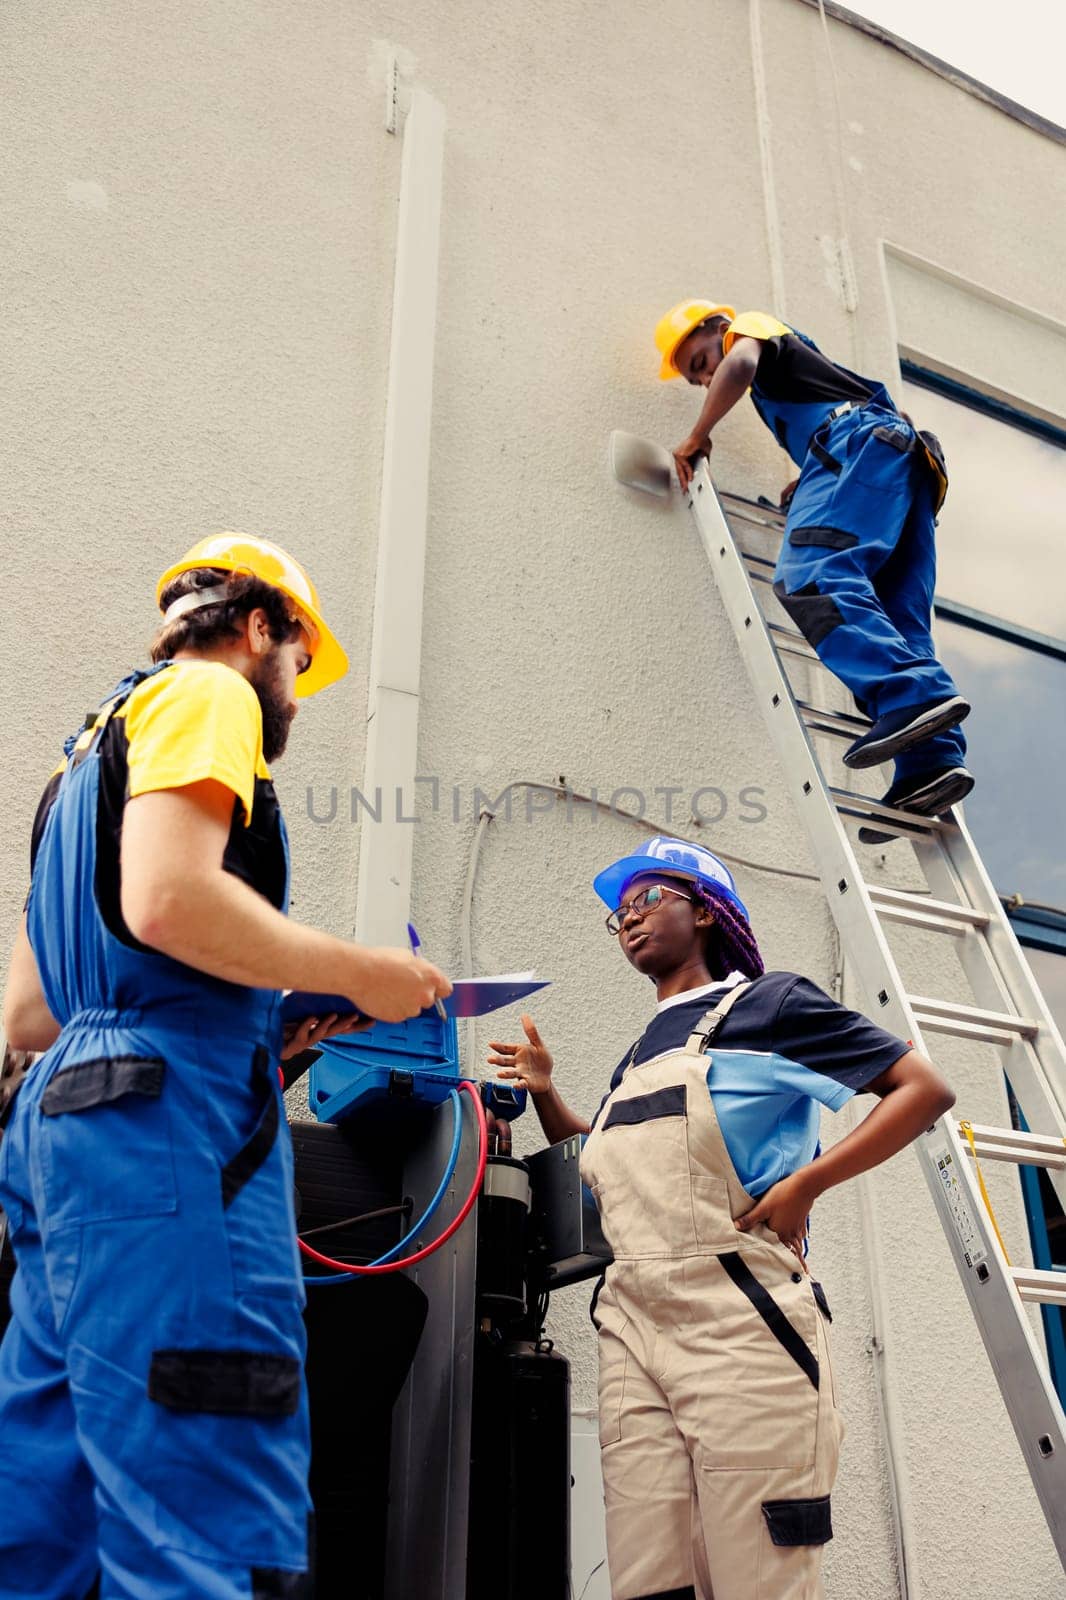 Competent wiremen diverse coworkers commissioned for external air conditioner routine check up, writing findings on clipboard. Professionals doing hvac system investigation of damaged parts